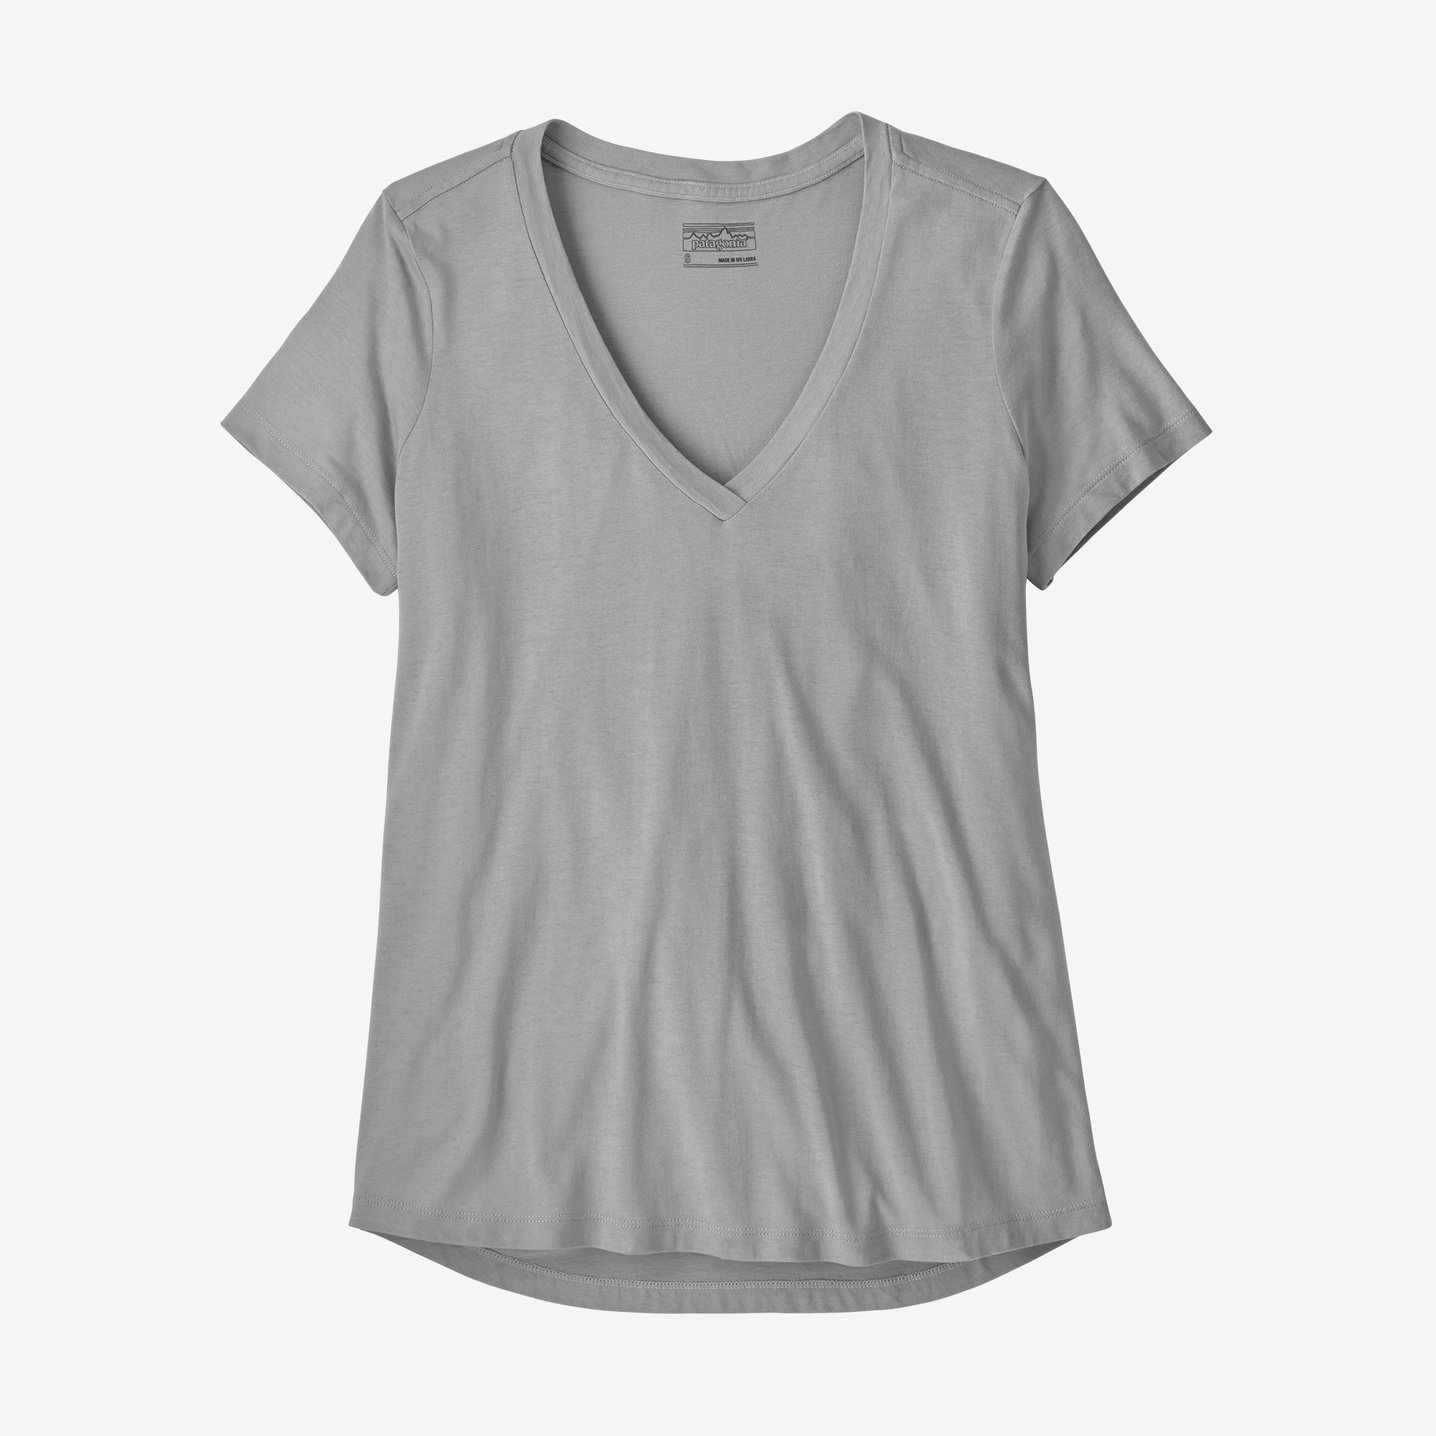 Patagonia Women's Side Current Tee